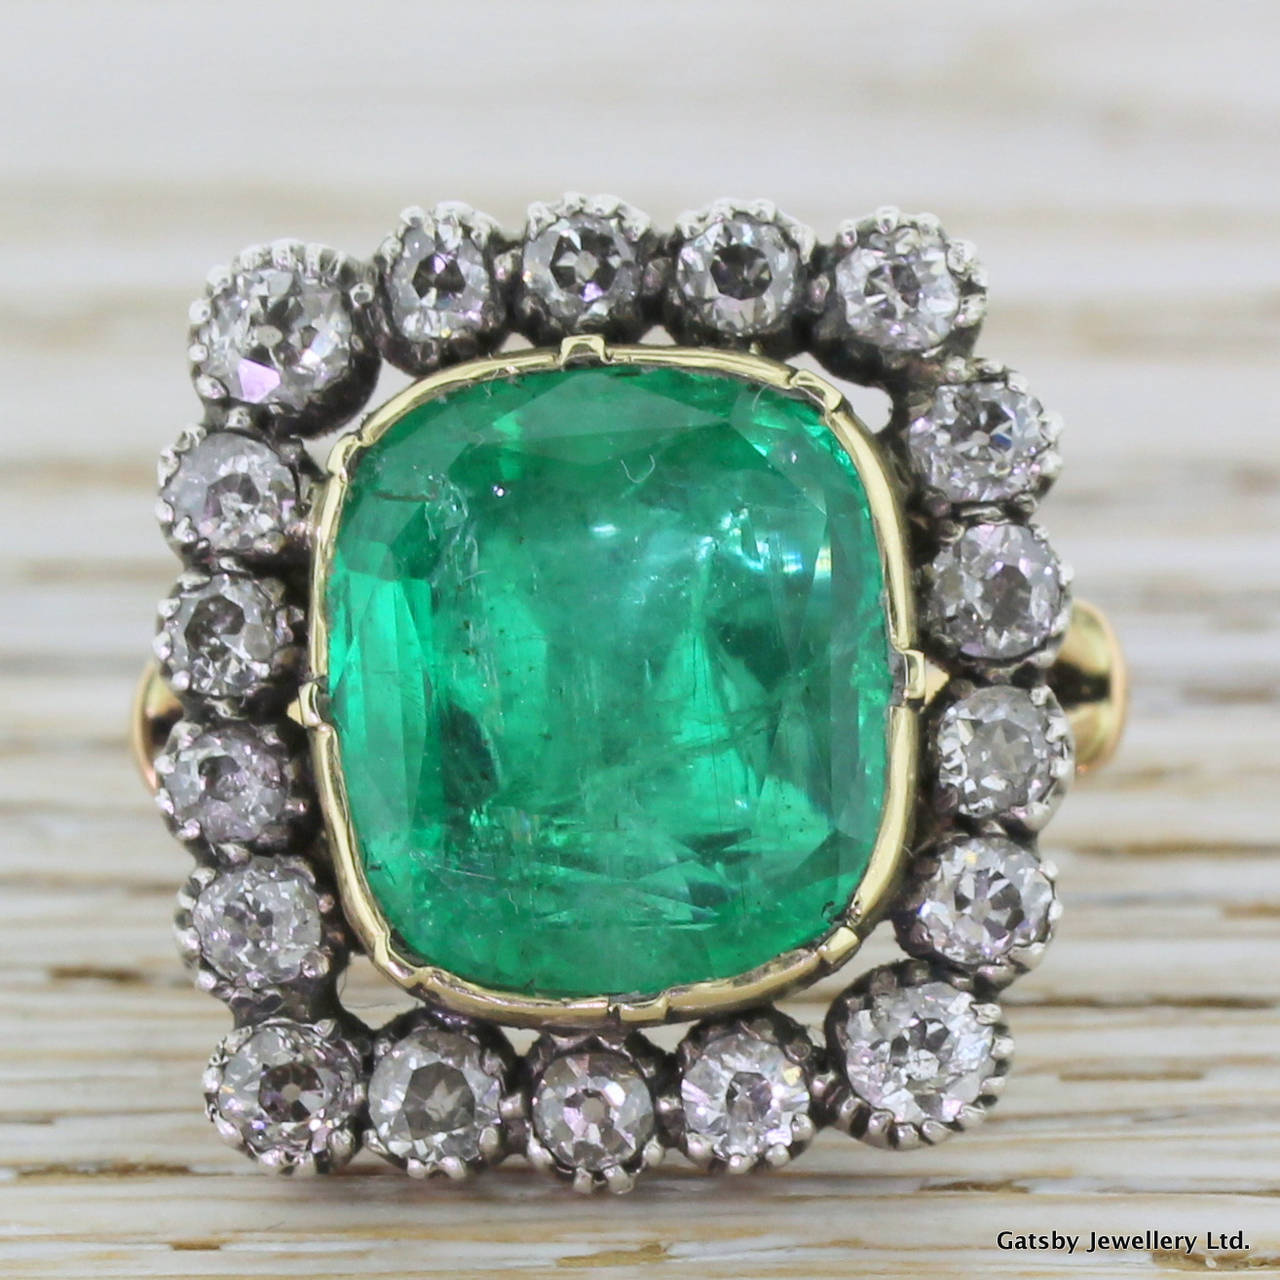 A Colombian emerald so bright and so green it looks electric. This grand cushion shaped stone is rub-over set in yellow gold with 18 white old mine cut diamonds set in silver in the surround. Set upon an elegant split shoulder band, this fine ring